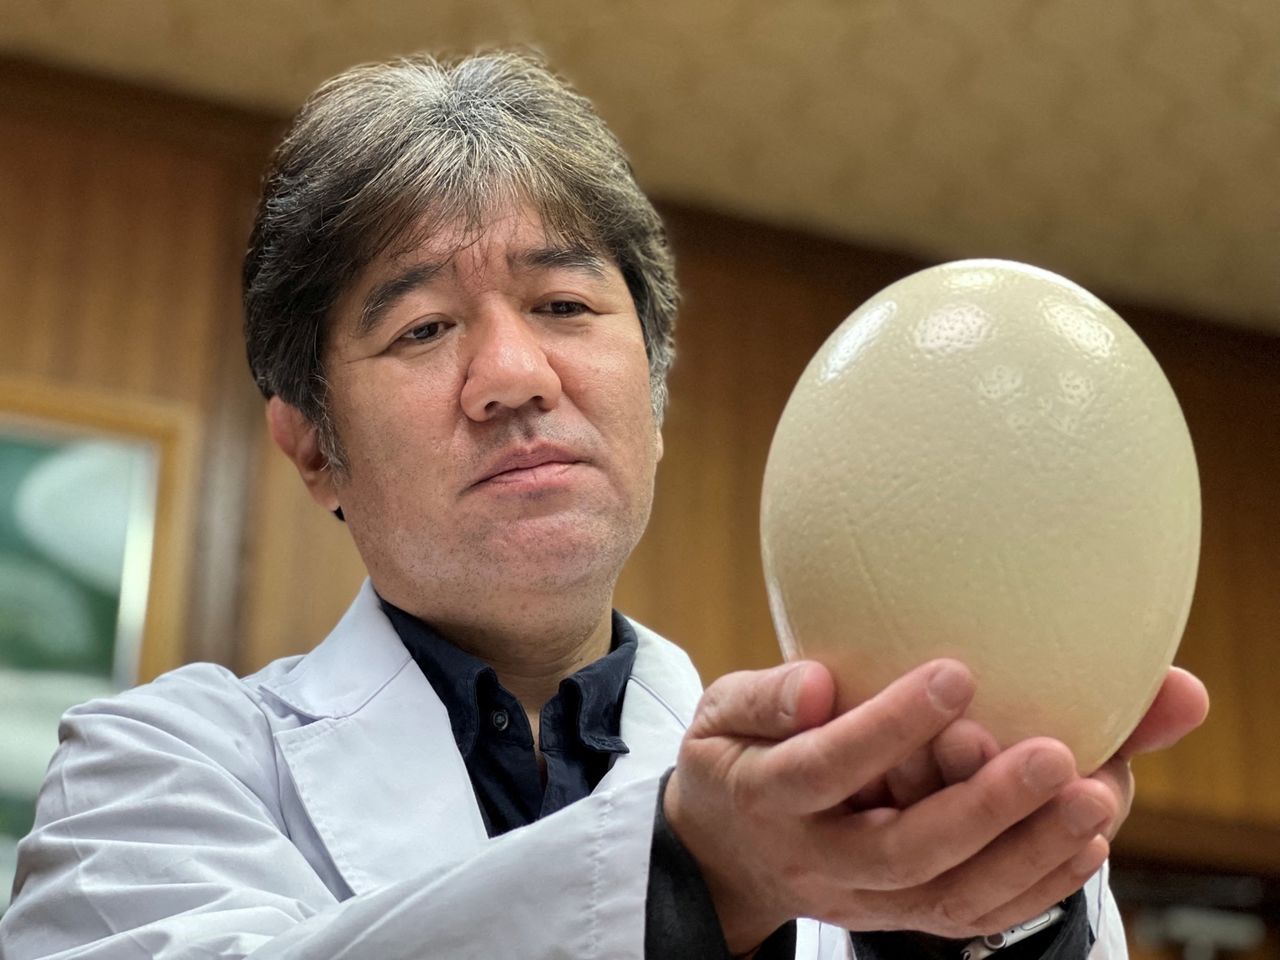 Kyoto Prefectural University President and Doctor of Veterinary Medicine Yasuhiro Tsukamoto holds an ostrich egg in Kyoto, Japan in this handout photo taken August, 2021 and released by Kyoto Prefectural University. KPU/Handout via REUTERS